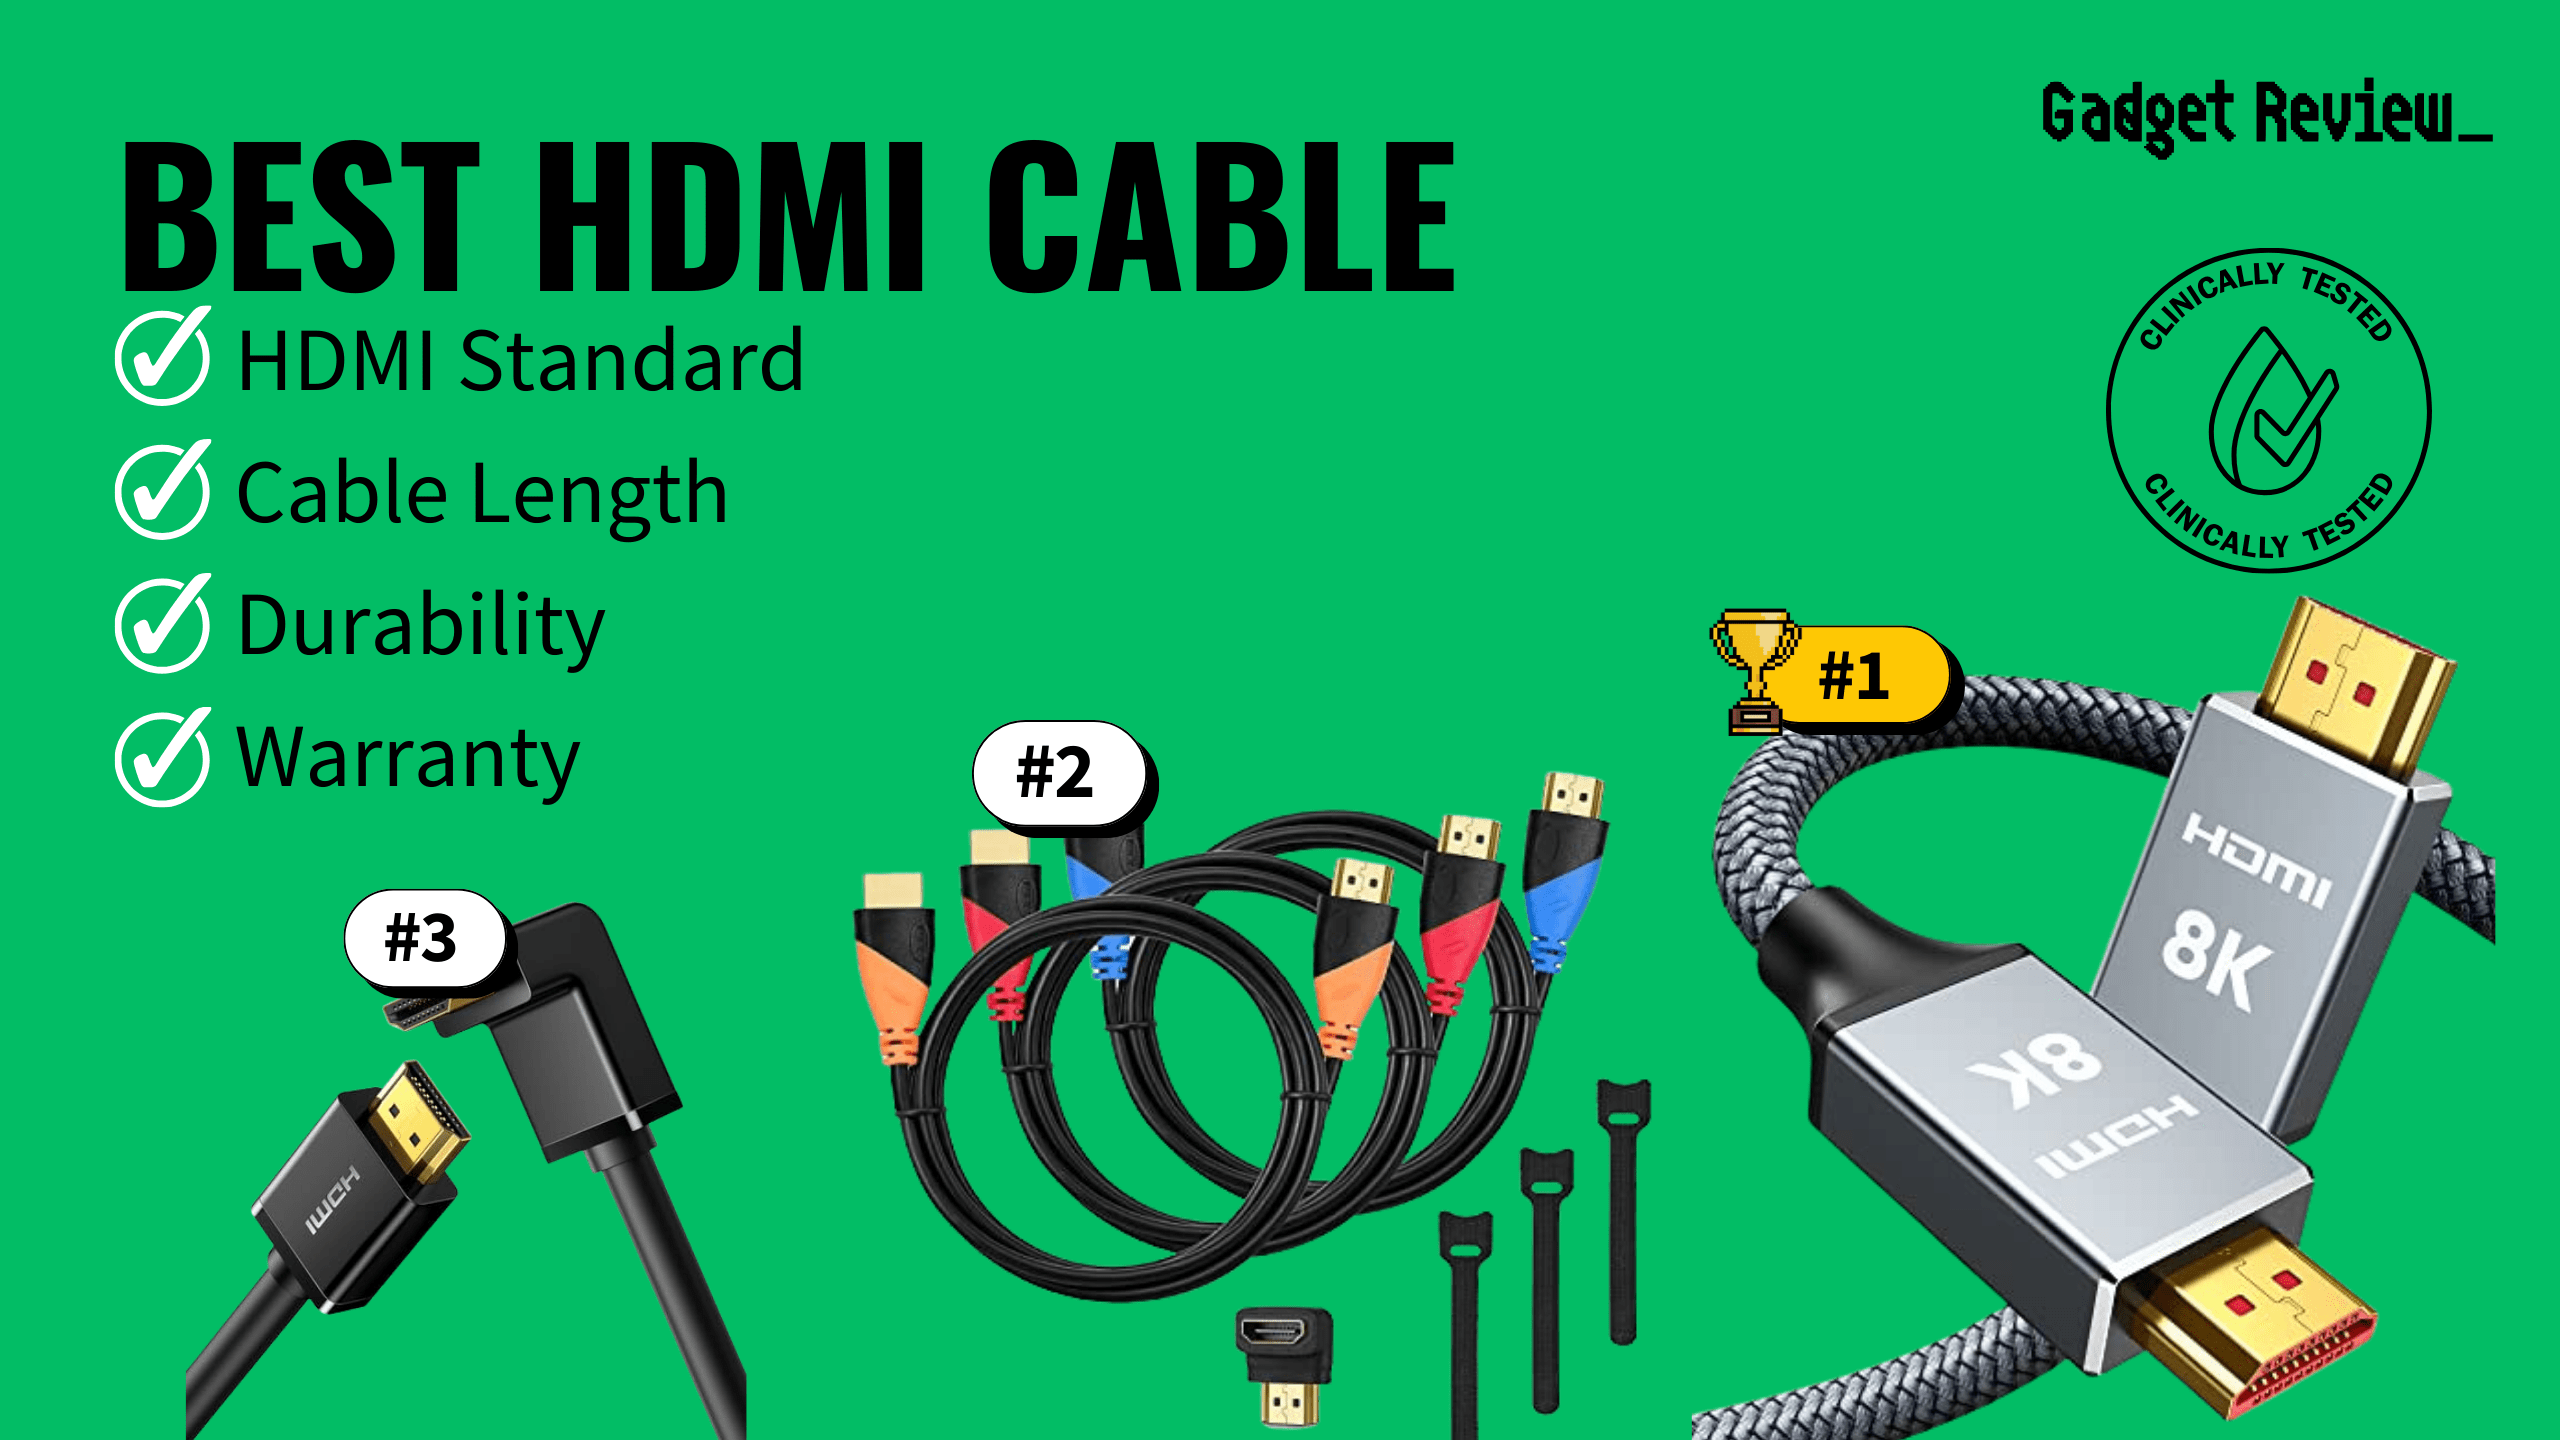 Best HDMI Cable